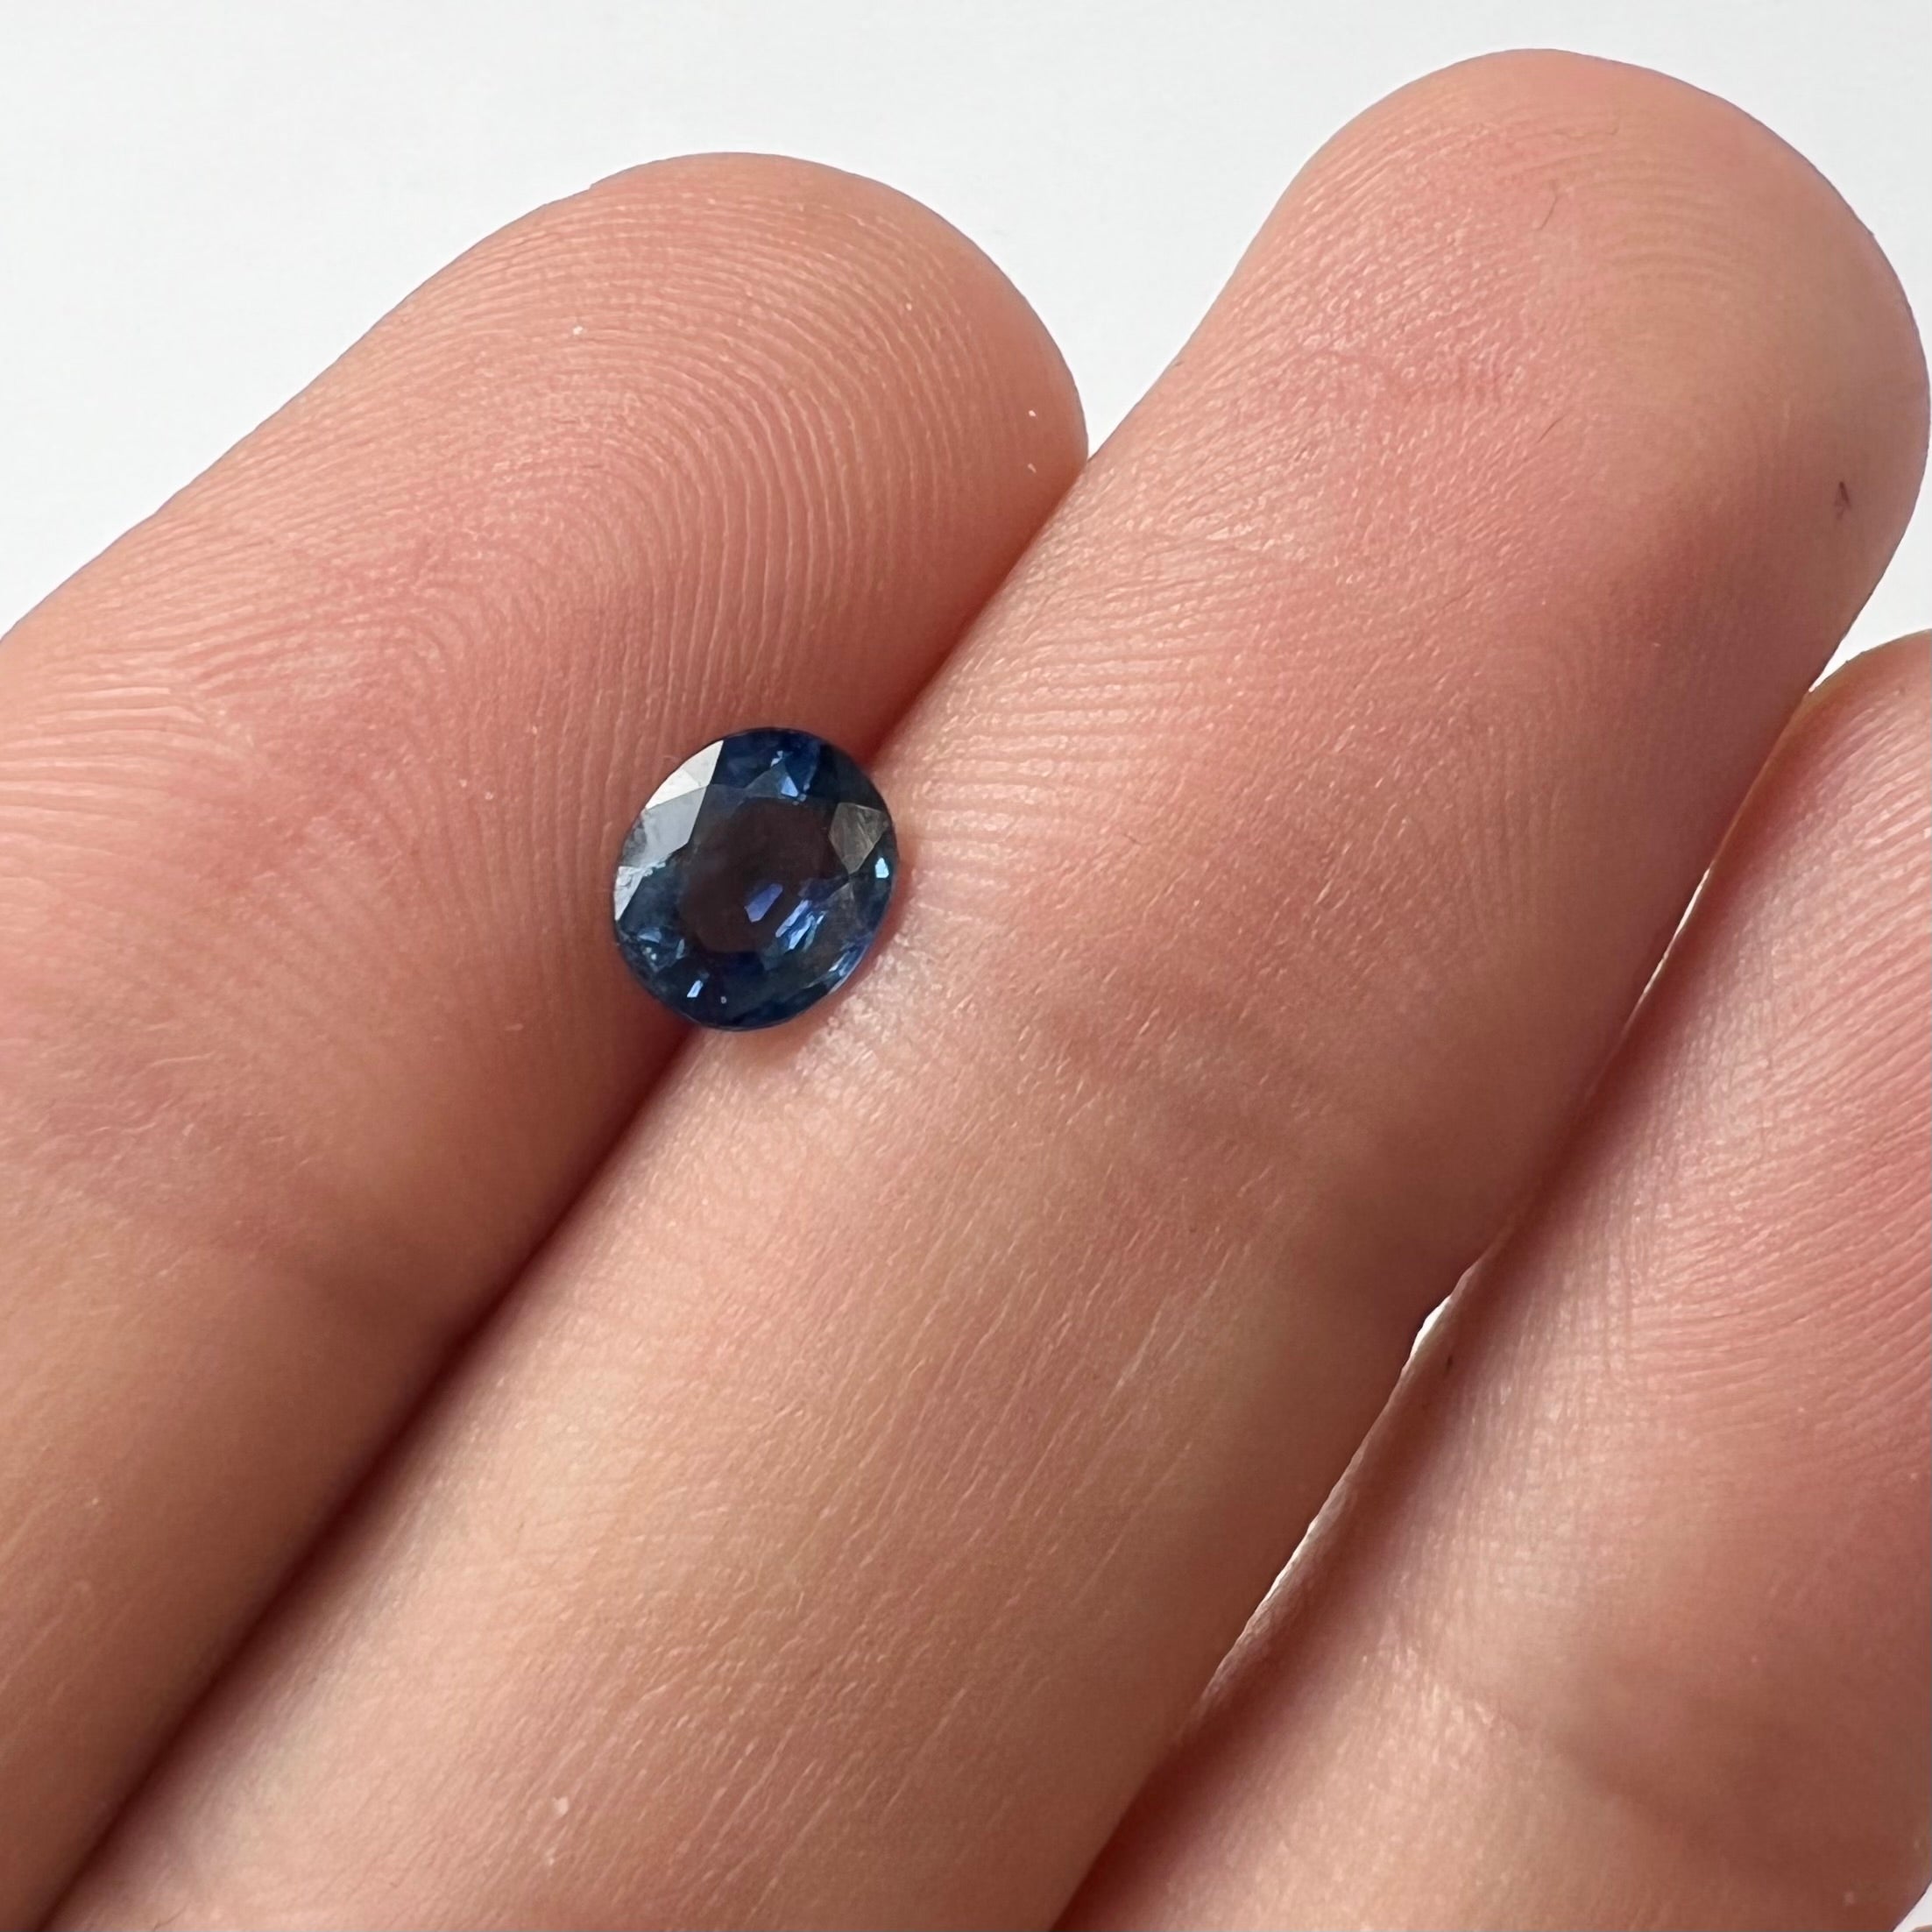 .75CT Loose Natural Oval Sapphire 5.92x5.03x2.66mm Earth mined Gemstone